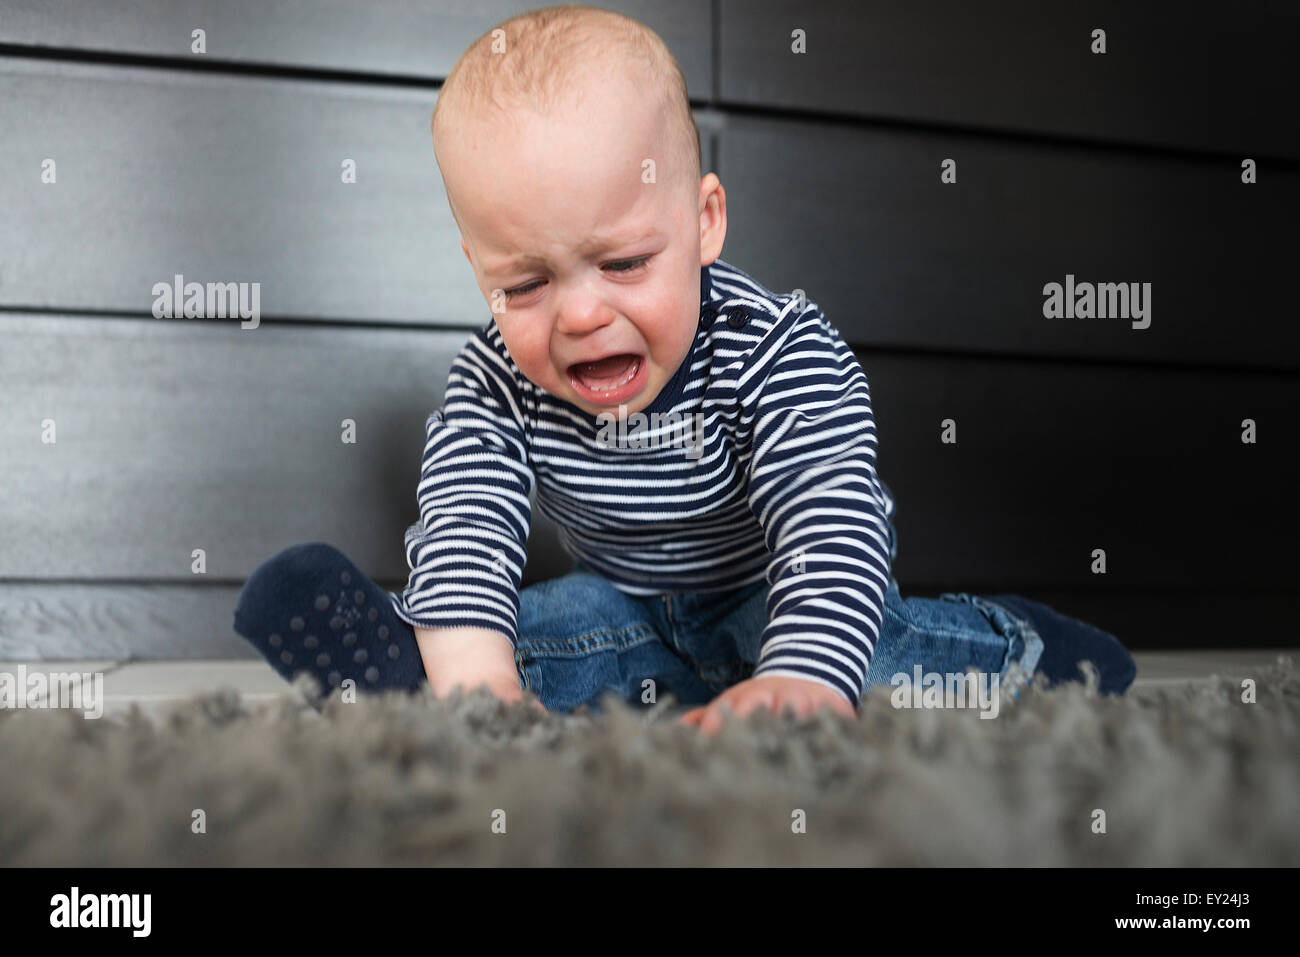 Crying baby boy sitting on rug in living room Stock Photo